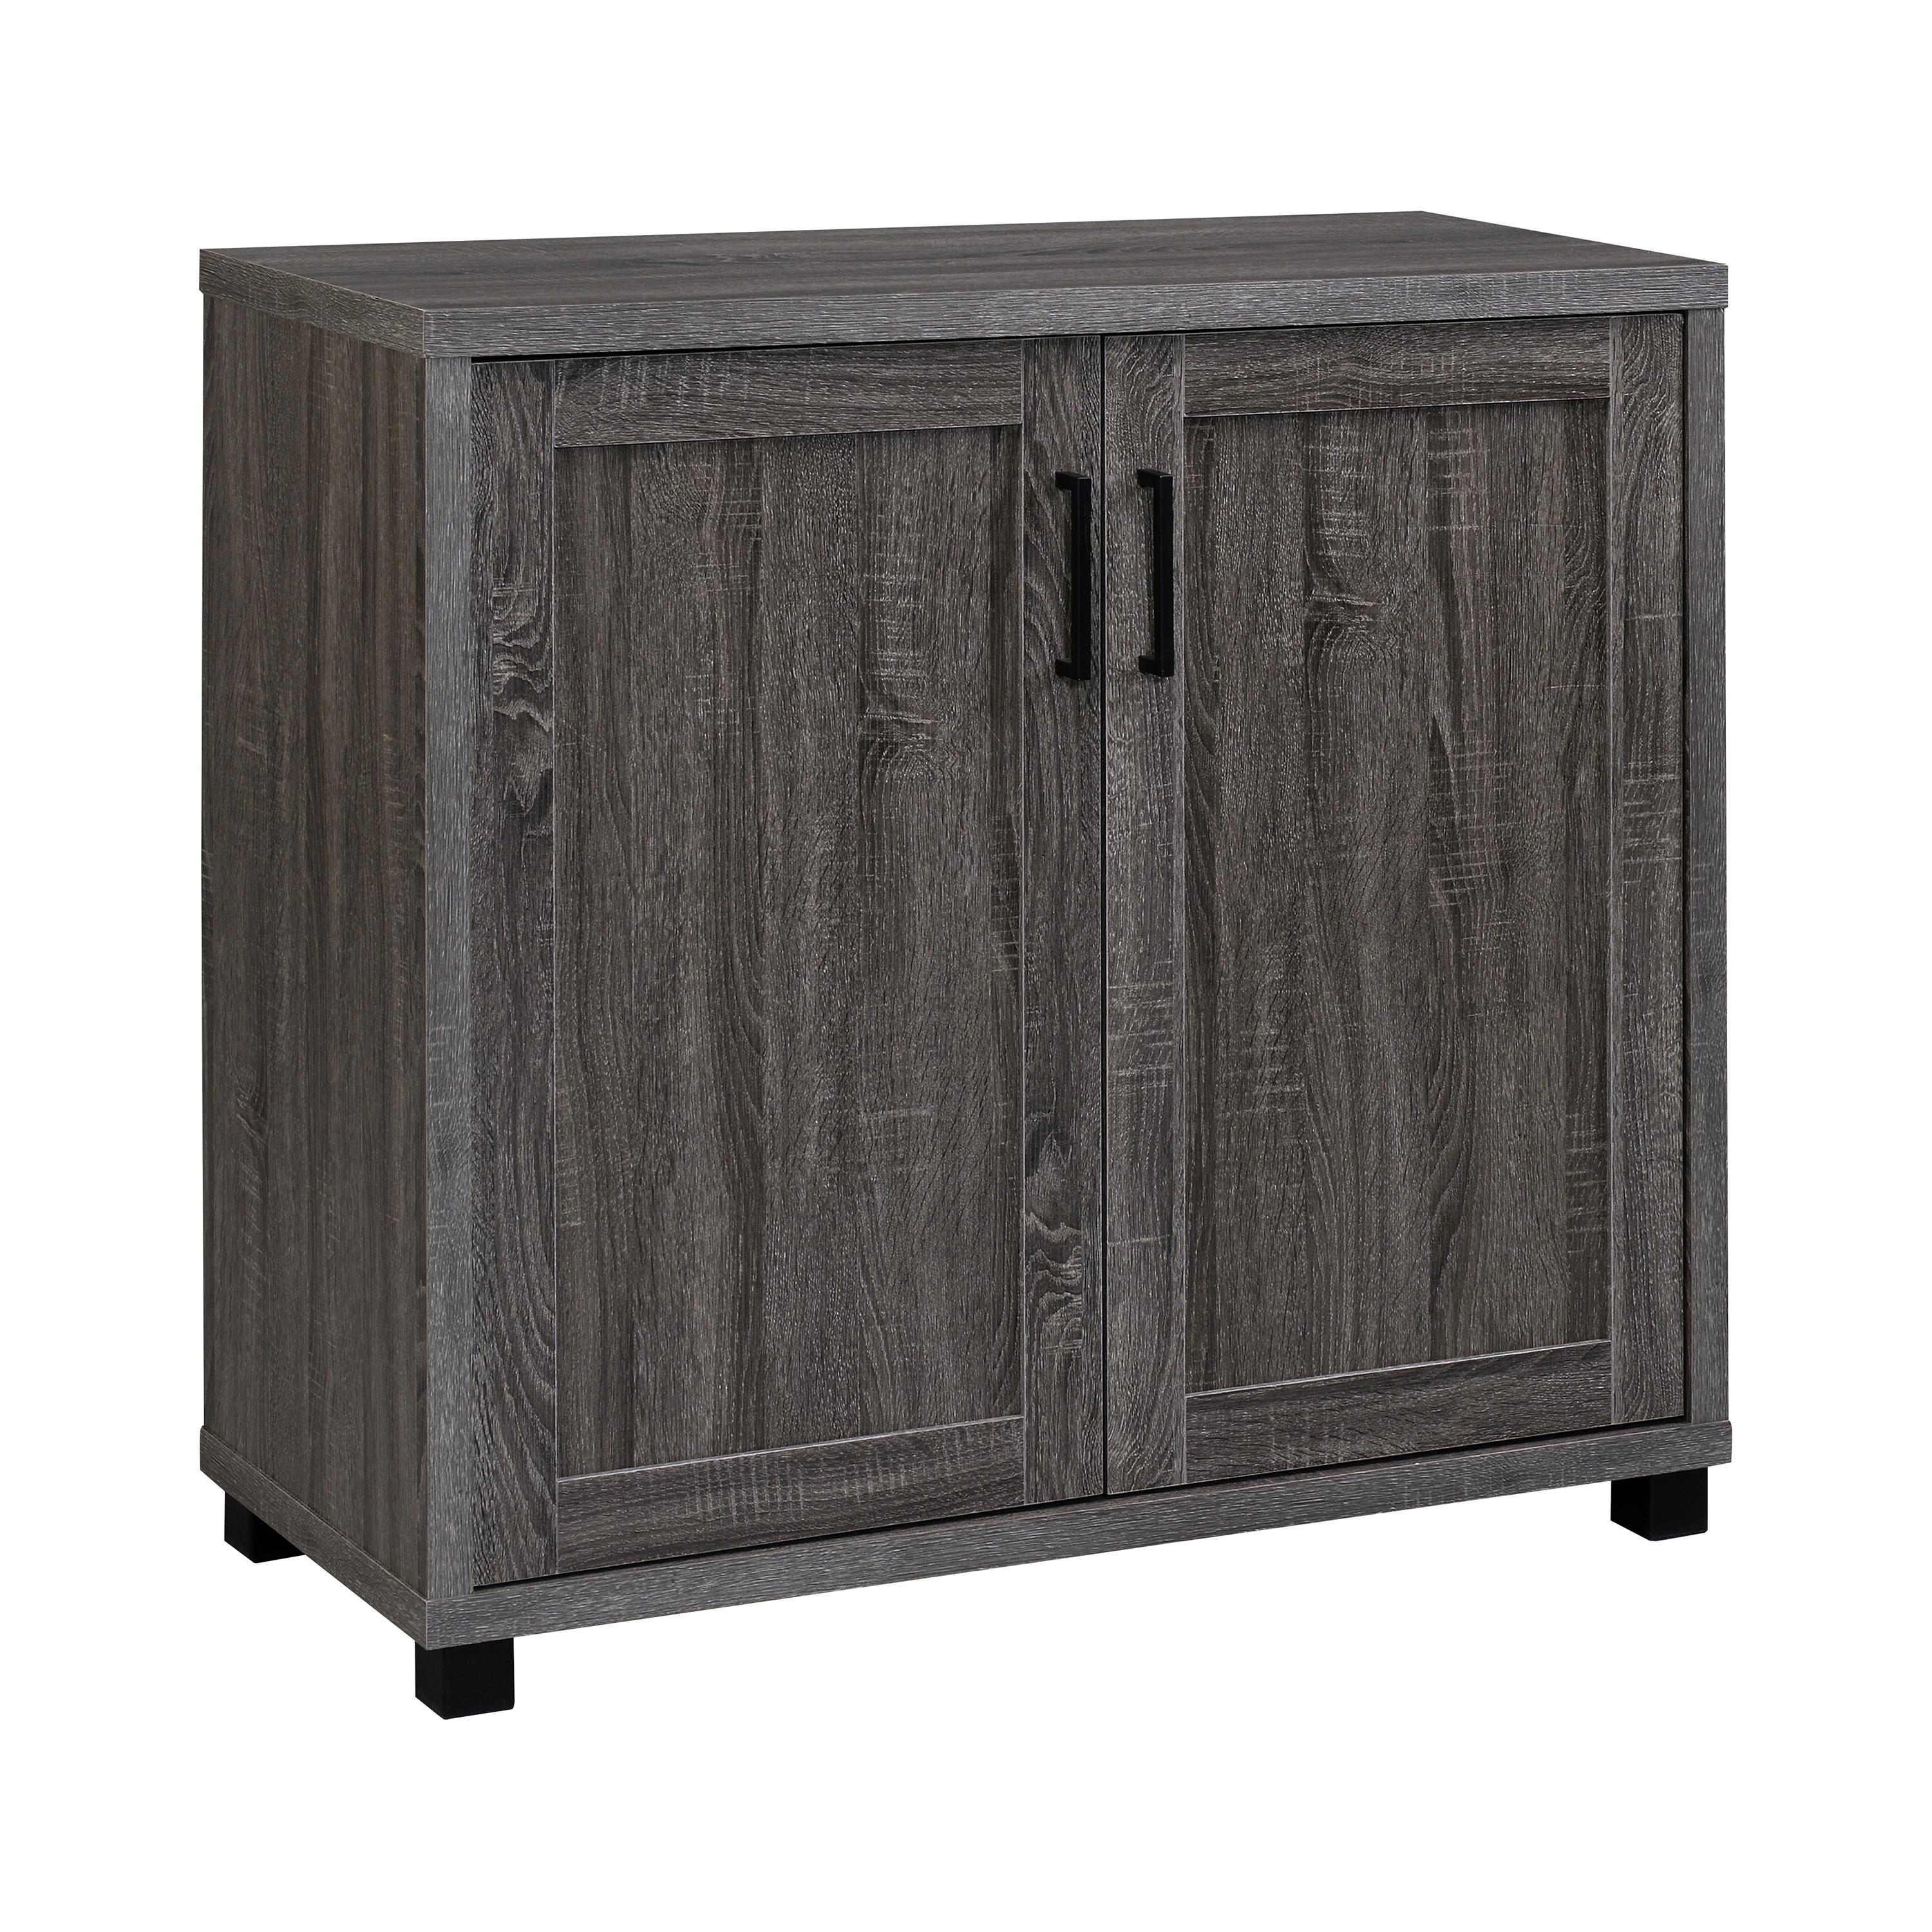 Rustic Accent Cabinet 951046 951046 in Gray 